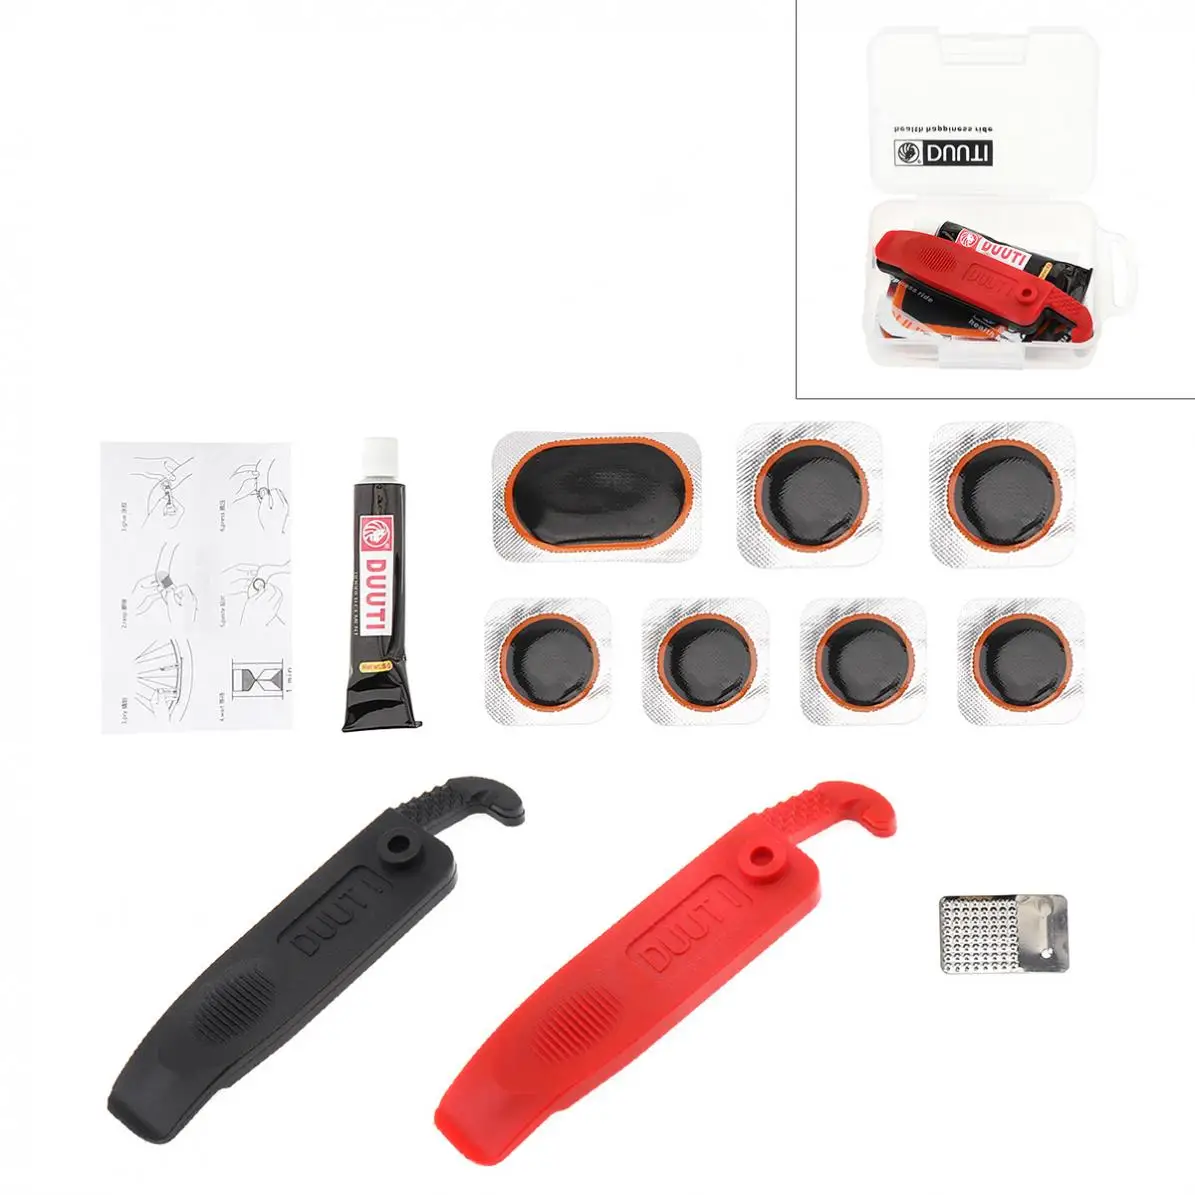 

DUUTI Bicycle Tire Repair Tool Portable Kit with Patch Crowbar Cement Transparent Box